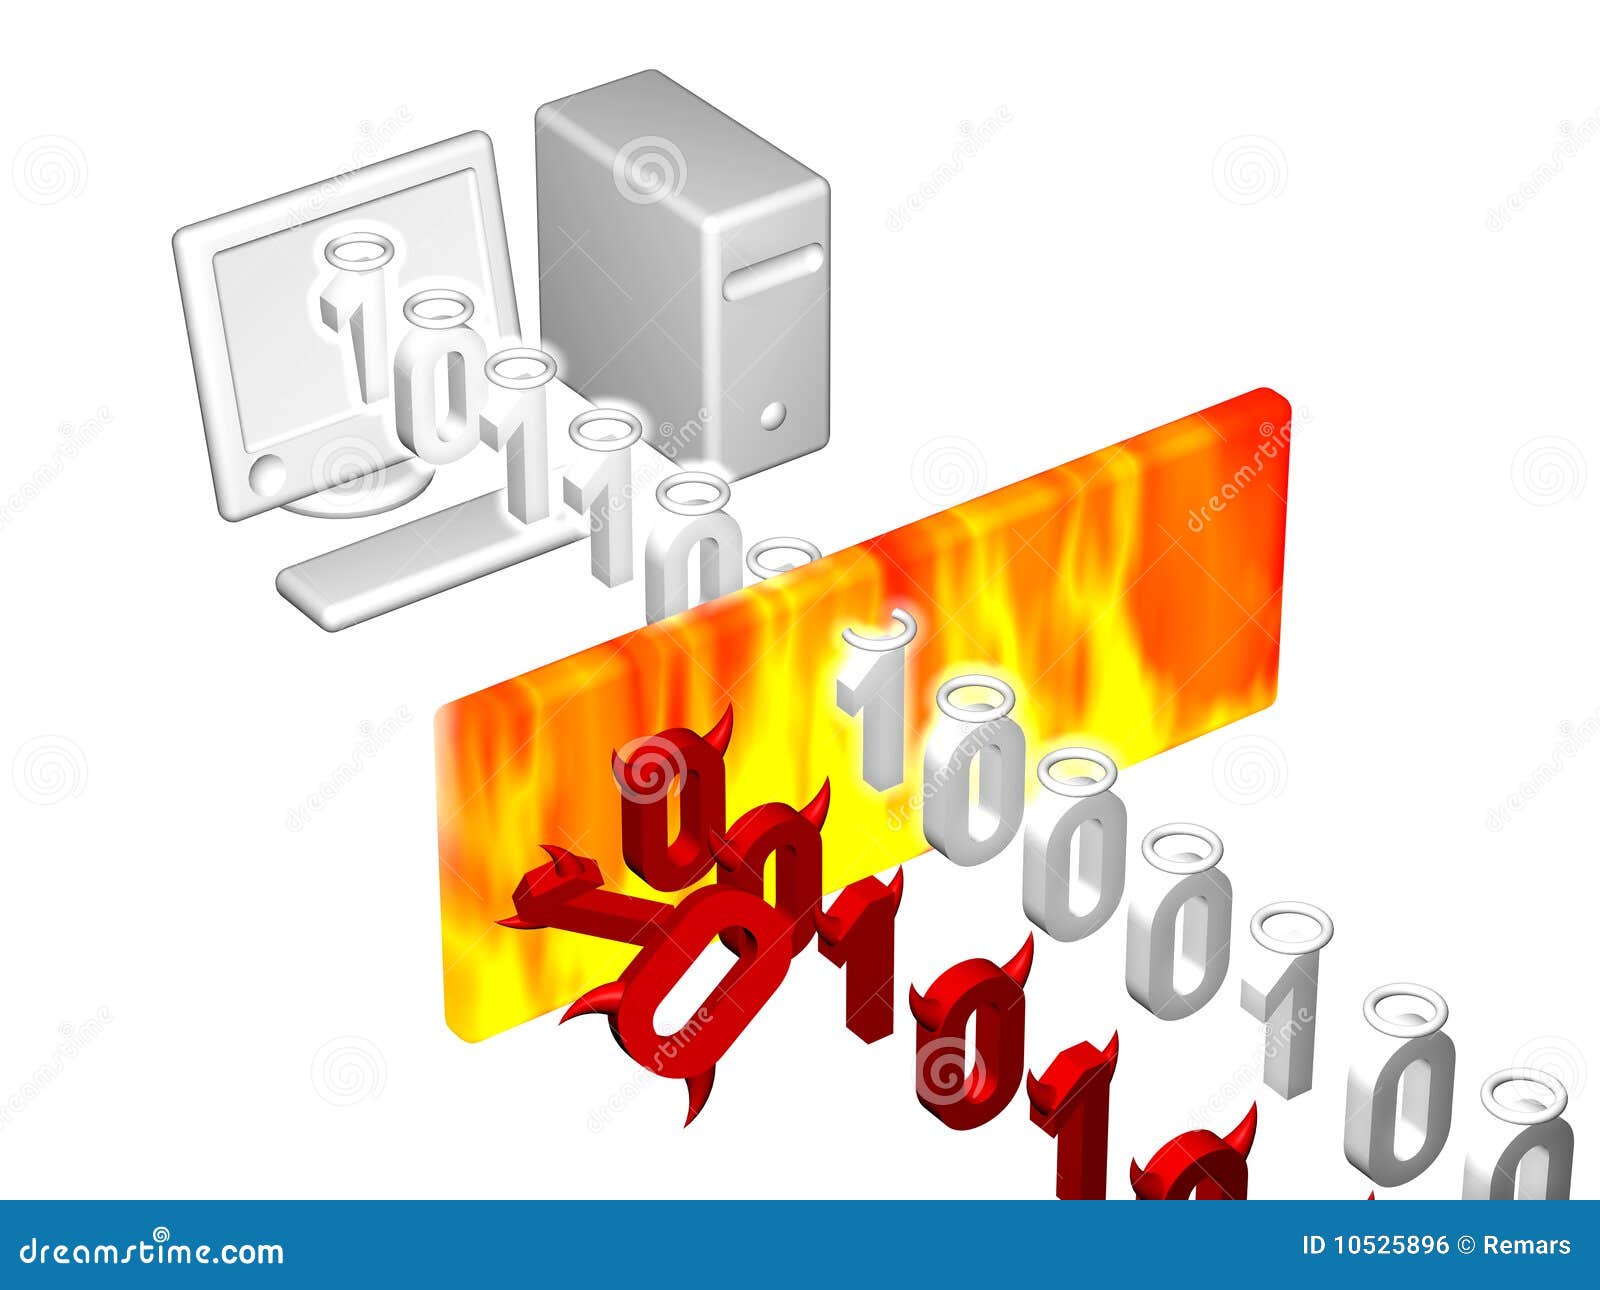 network security clip art free - photo #14